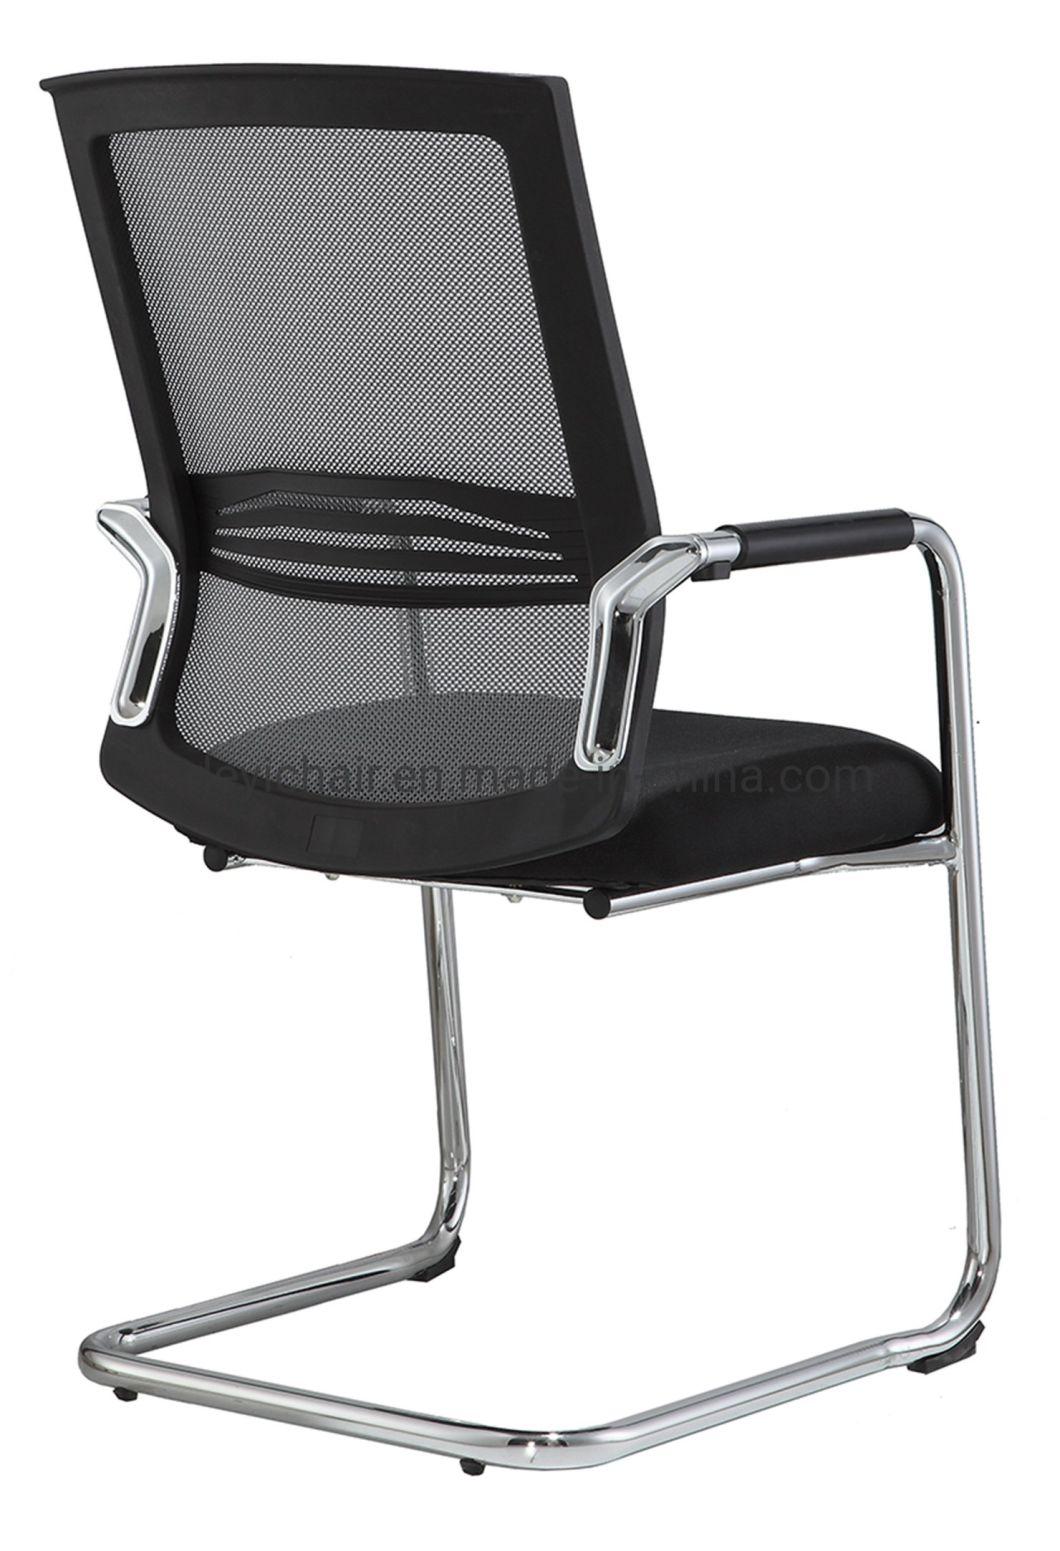 25 Tube 2.0mm Thickness Bow Frame with Armrest High Mesh Back Fabric Seat Conference Chair